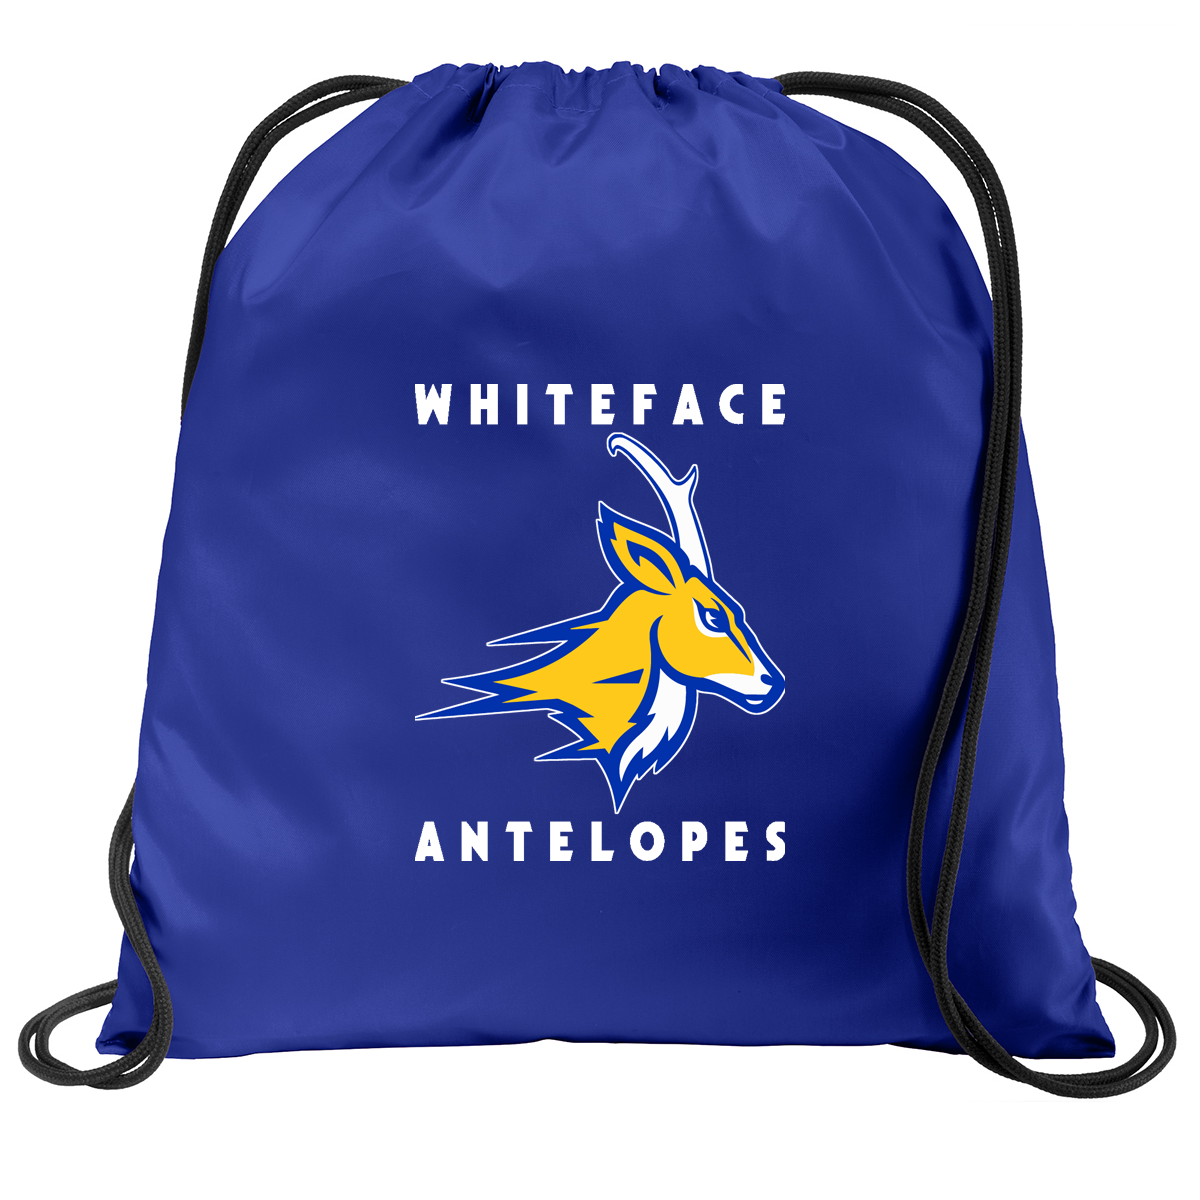 Whiteface Antelopes  Cinch Pack